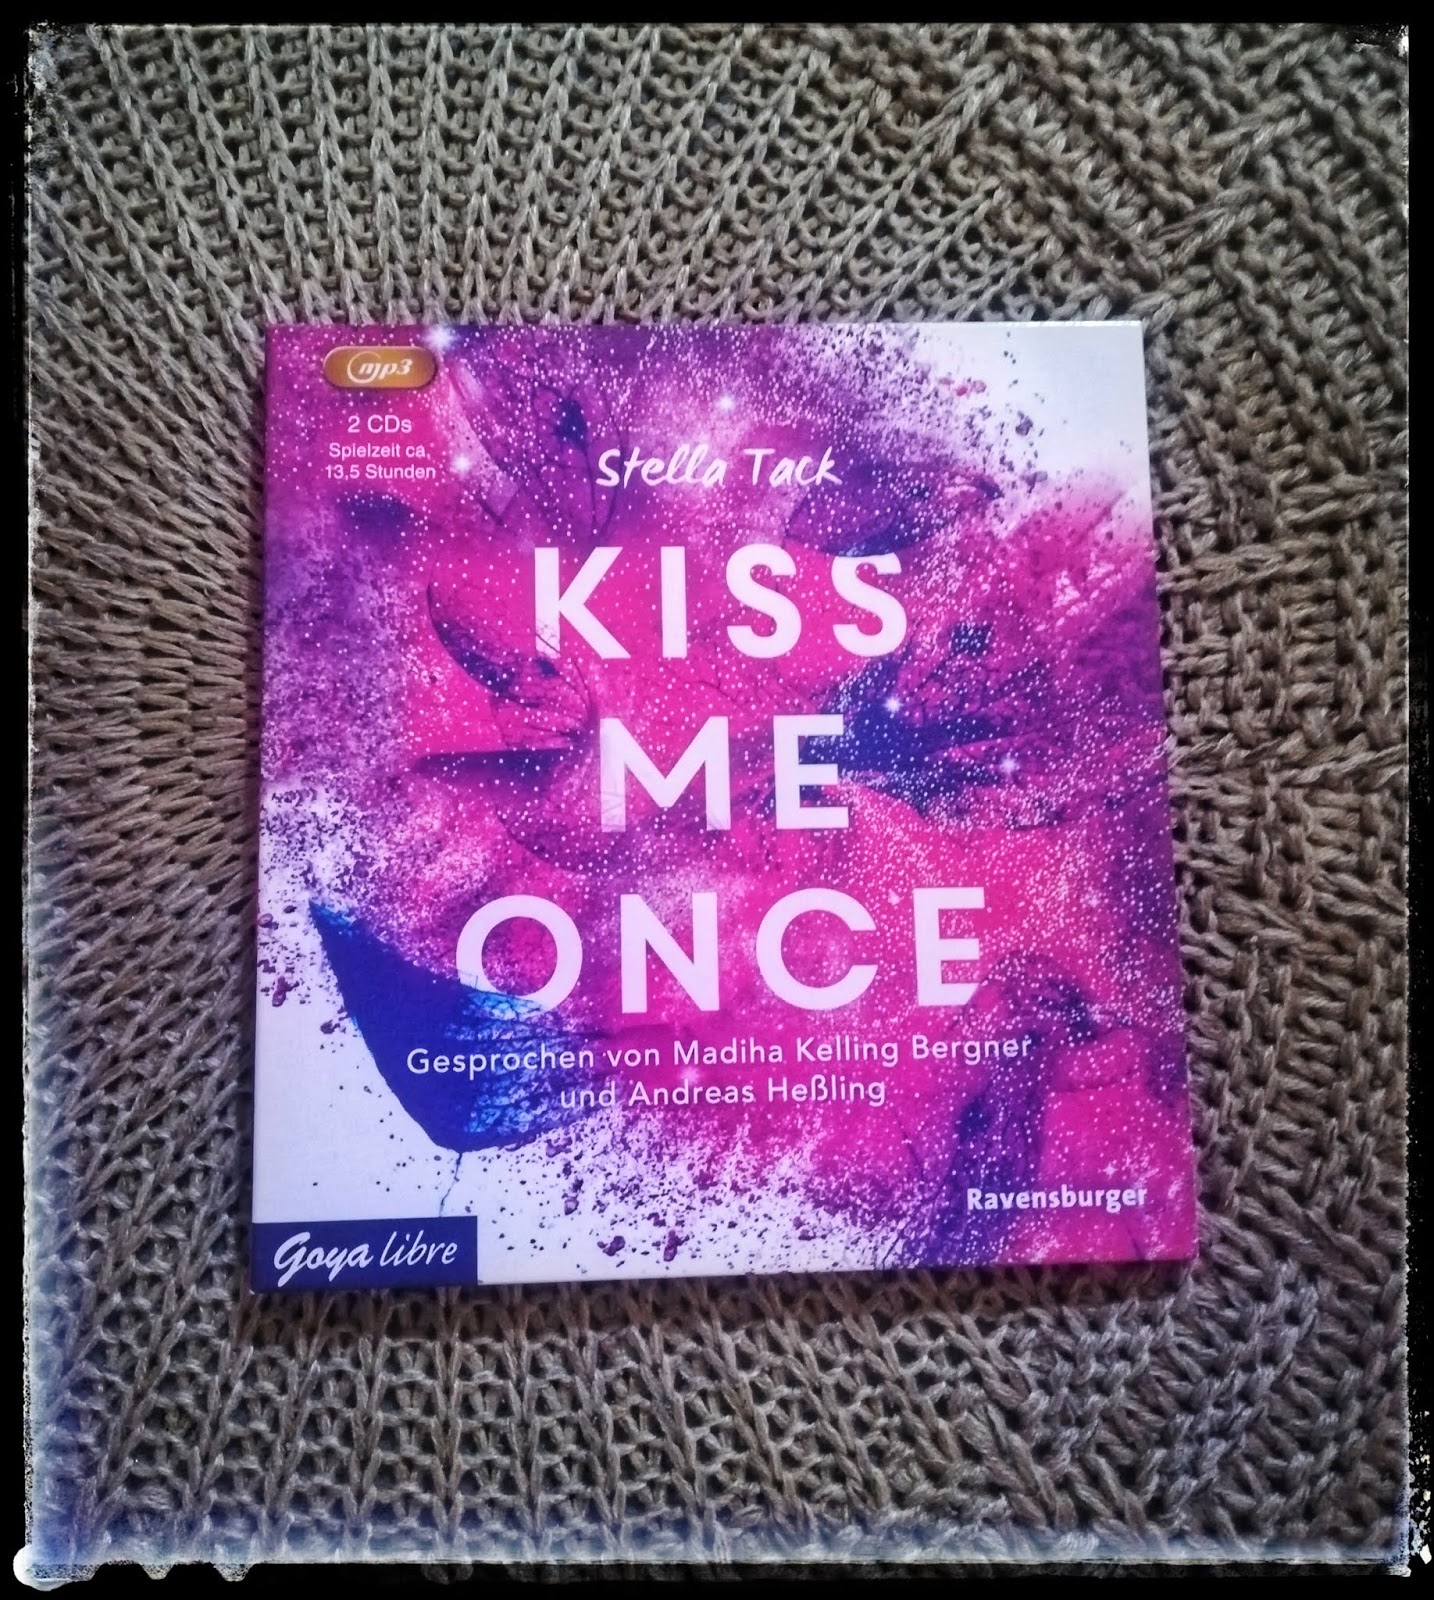 nichtohnebuch: Kiss me once